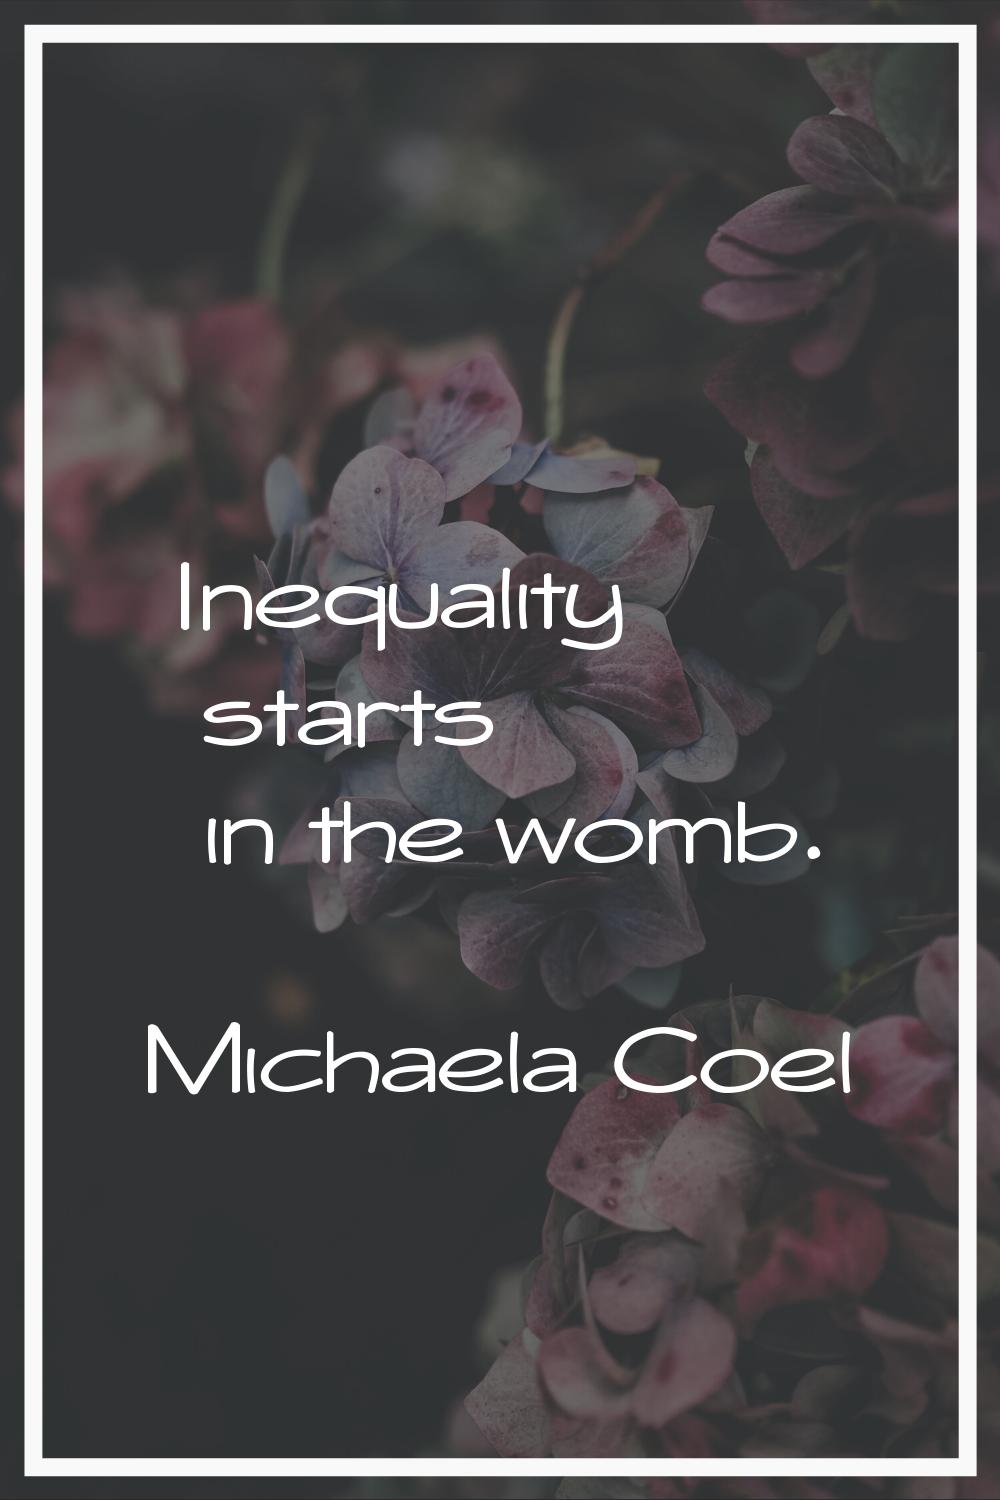 Inequality starts in the womb.